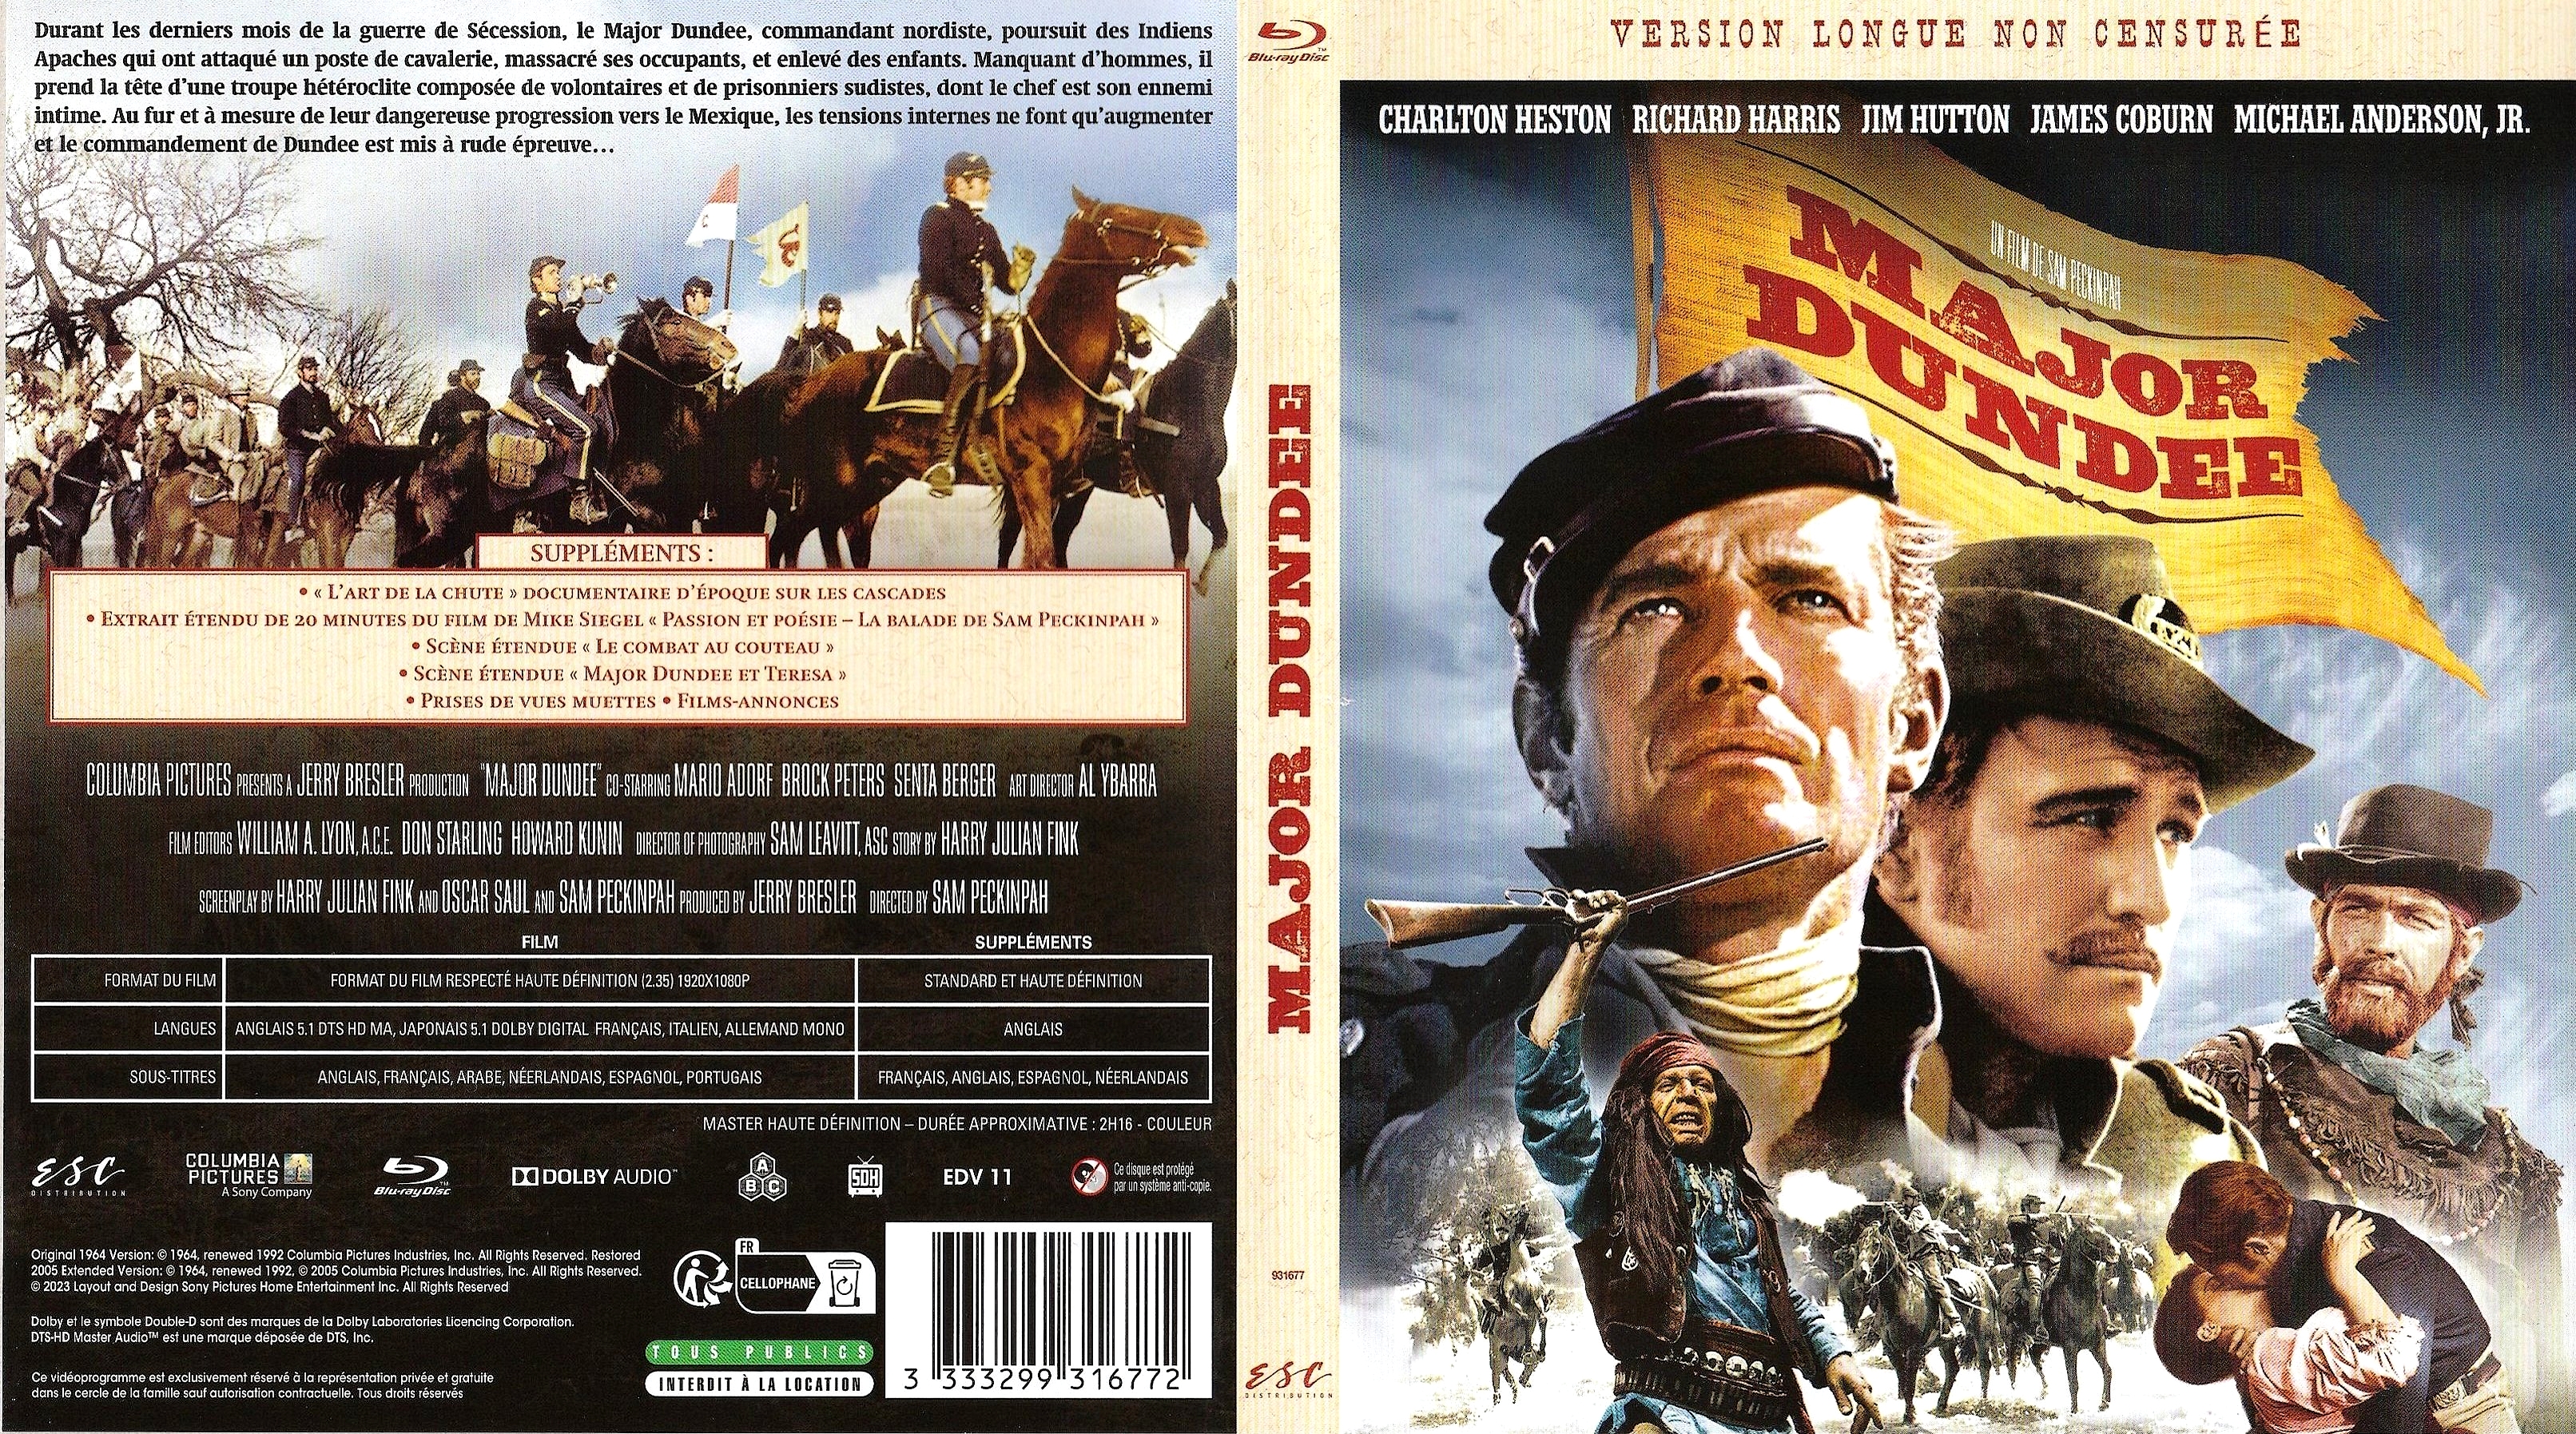 Jaquette DVD Major Dundee  (BLU-RAY)